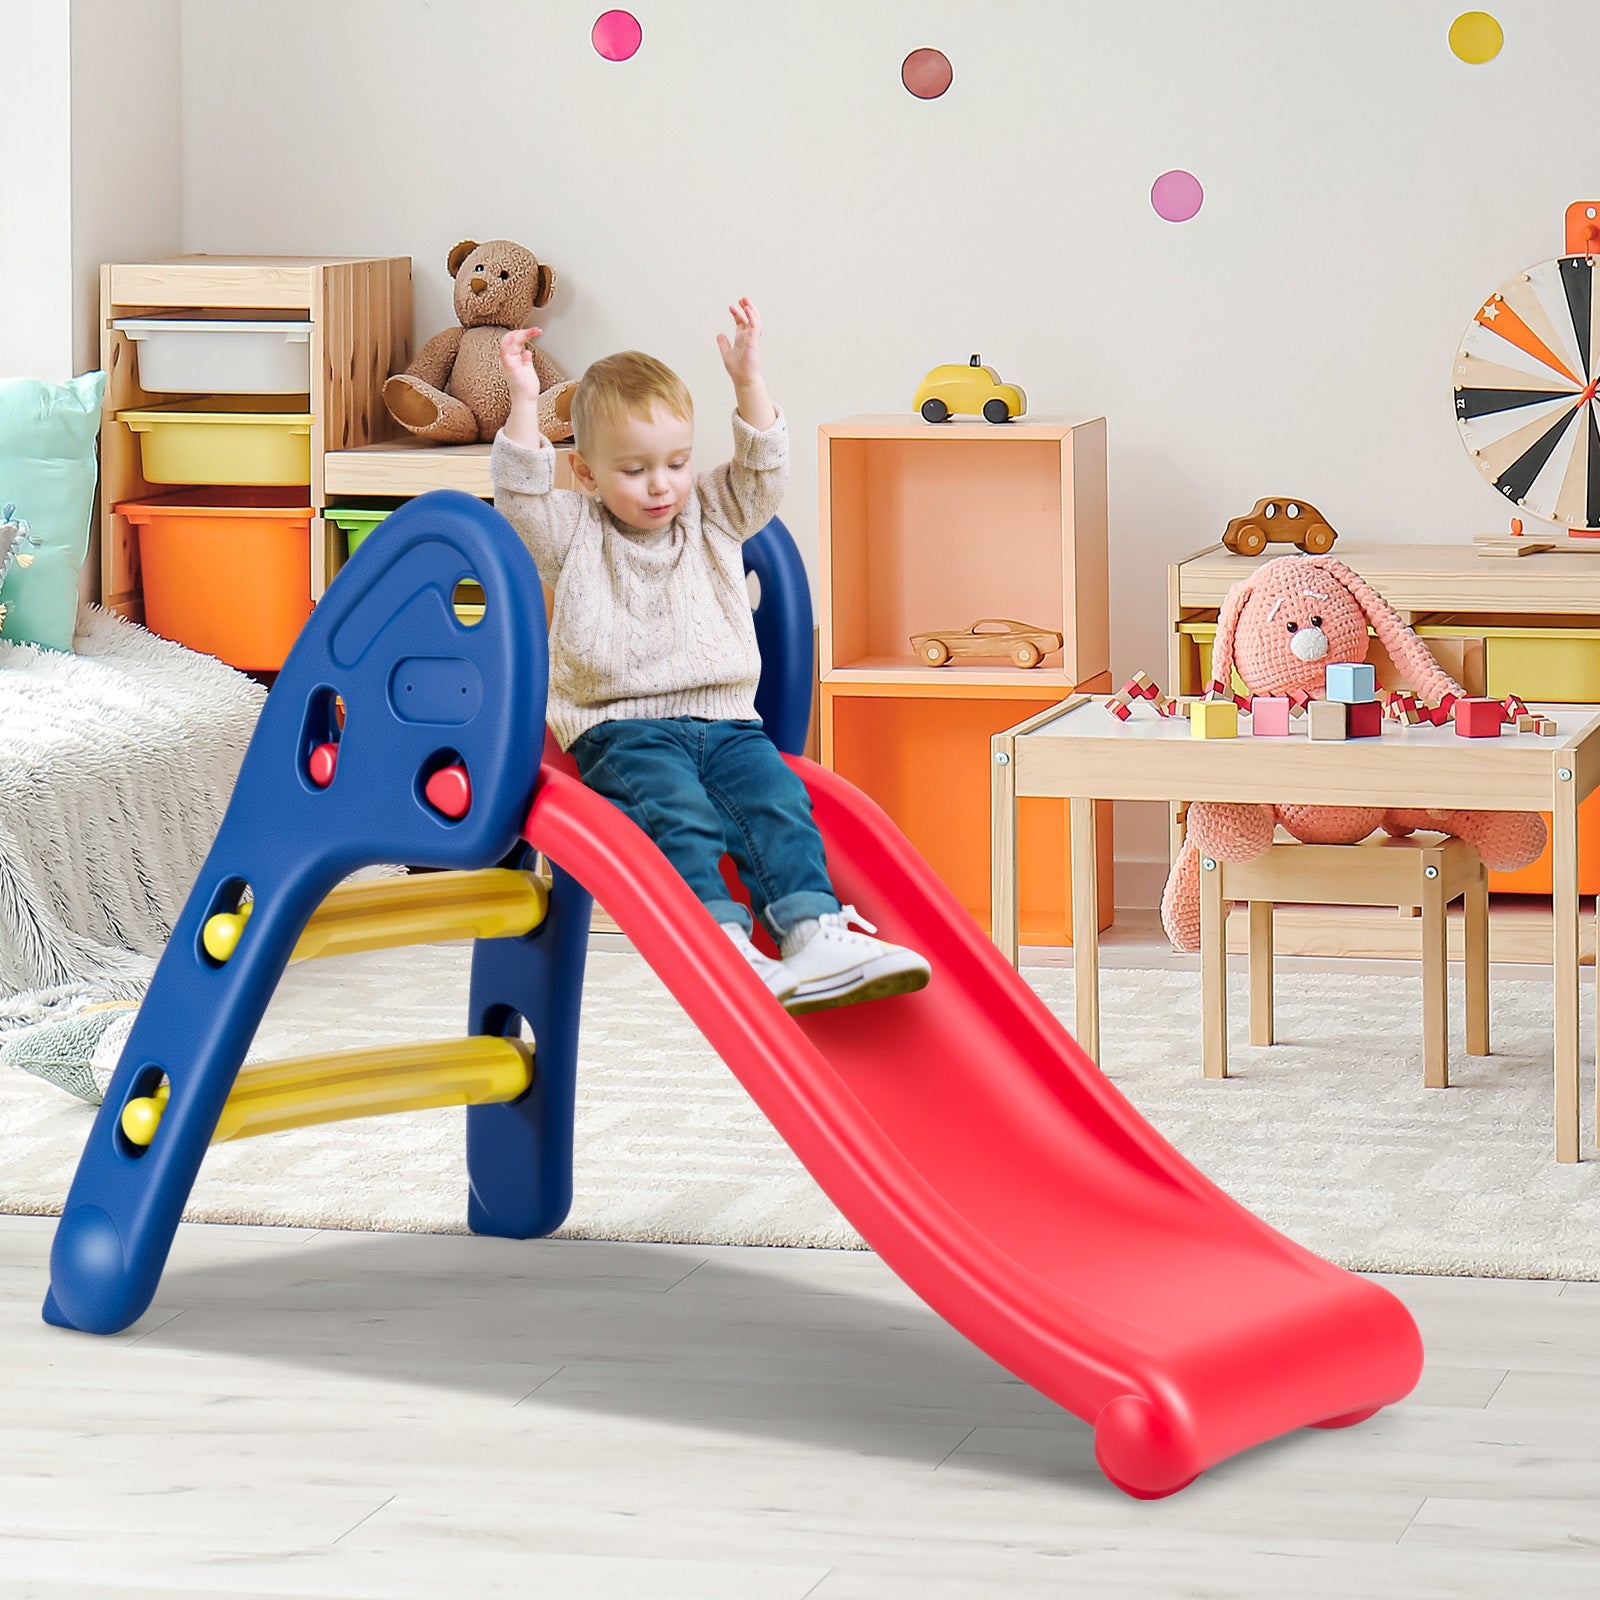 Combination of Climb and Slide:  This slide features easily climbable steps and a wide, smooth slide, providing kids with endless entertainment. The gradual slope of the steps allows even young children to climb independently, promoting fitness, balance, and coordination.